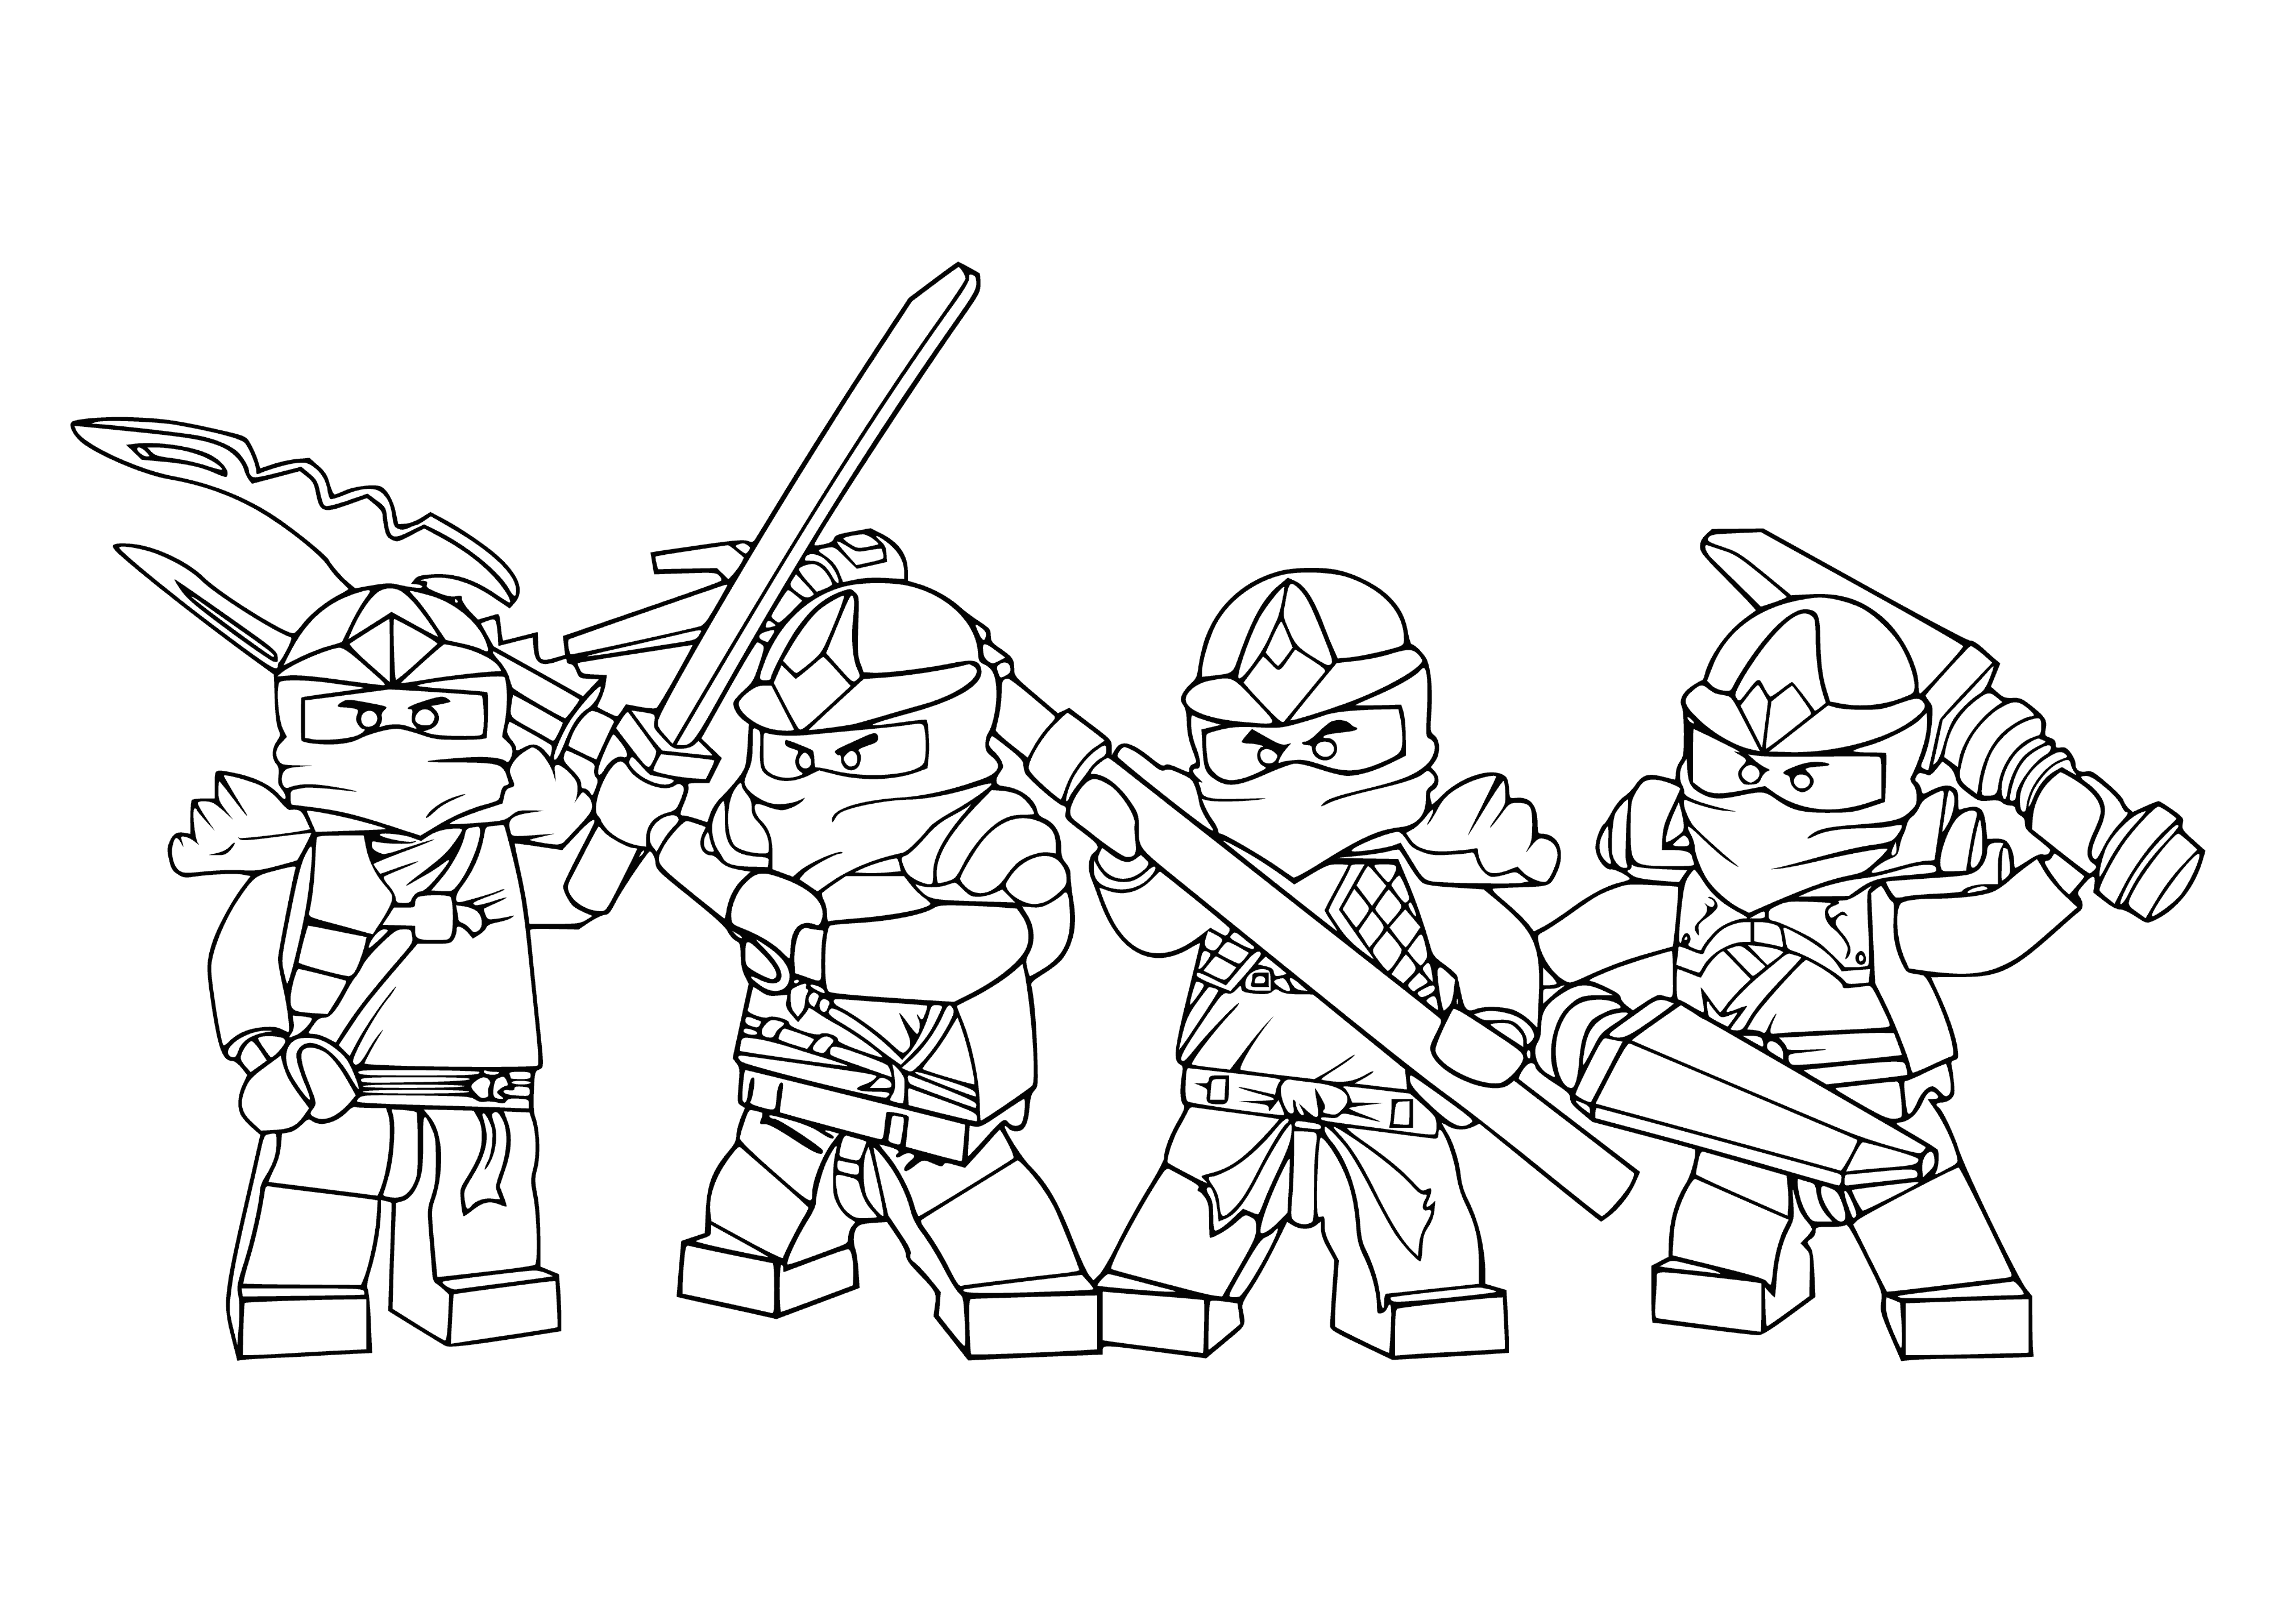 coloring page: Four LEGO ninjas: two on a building, one jumping off & one on the ground with swords.